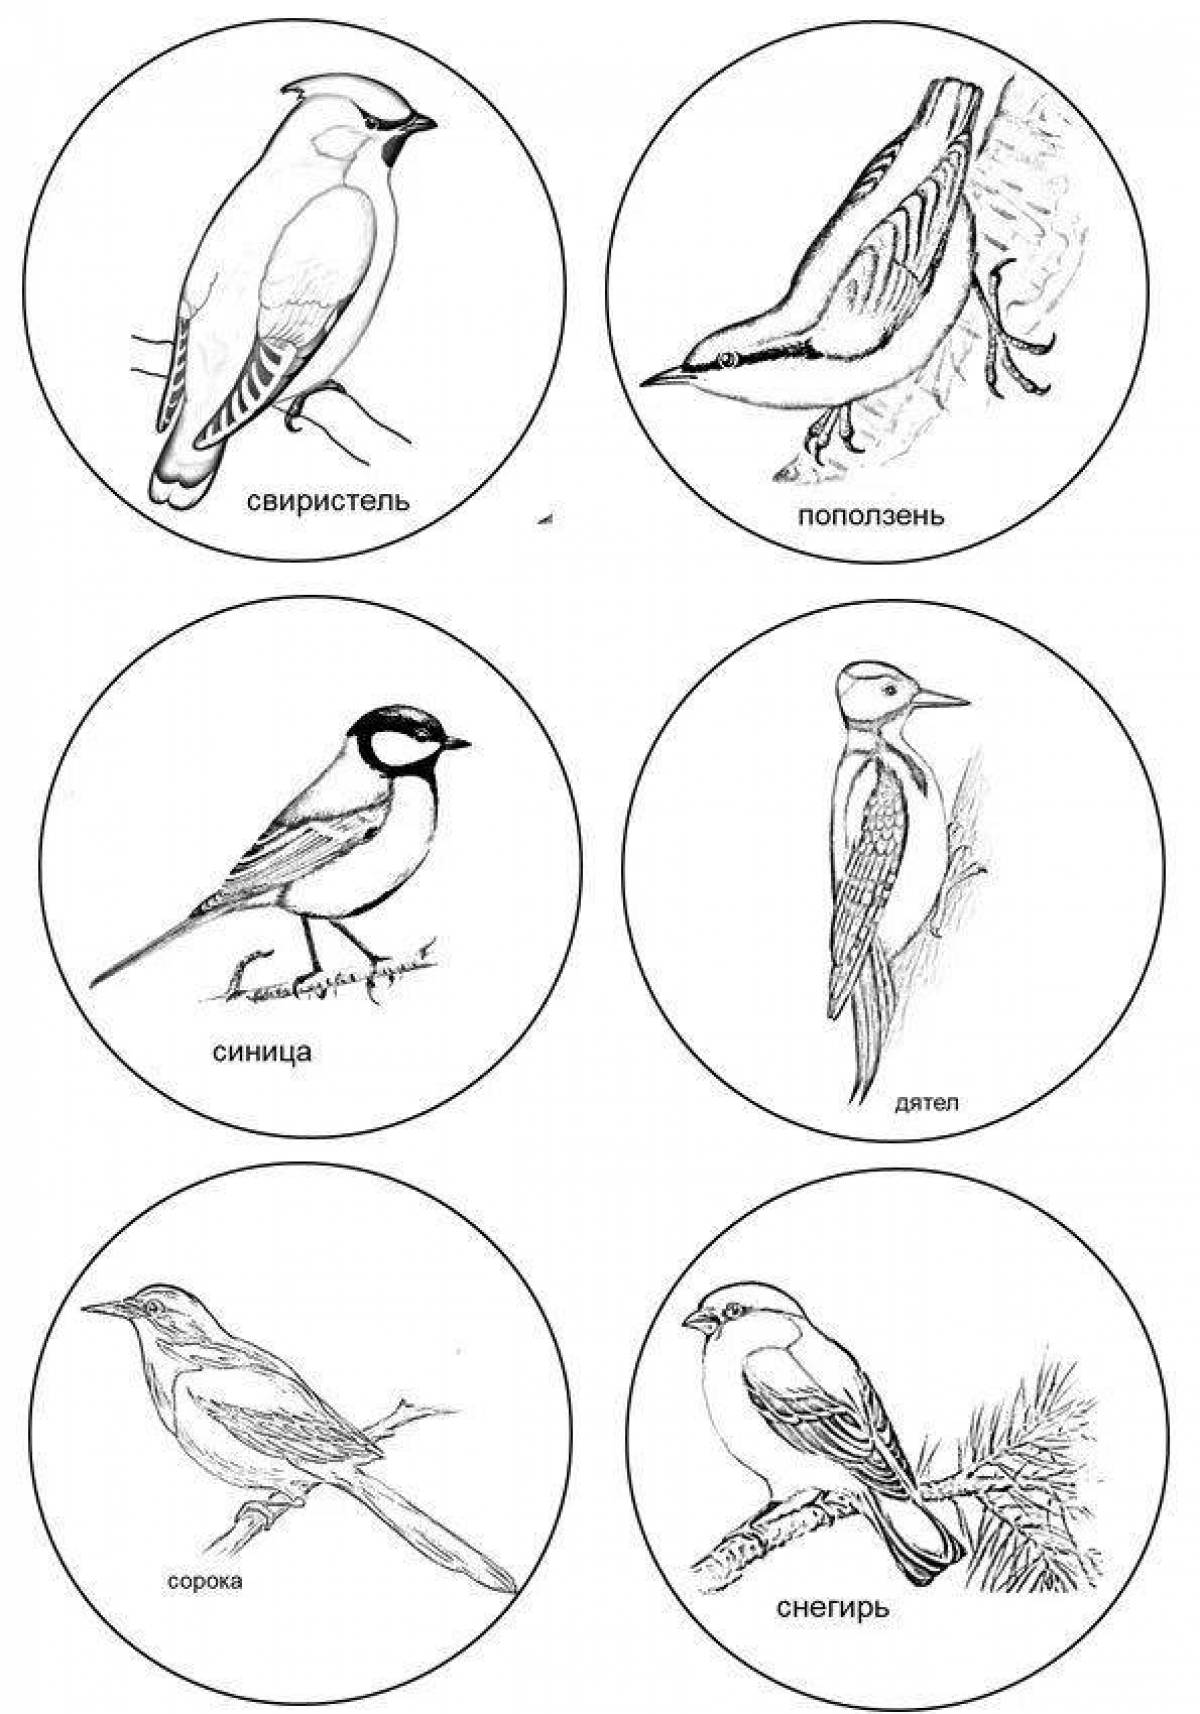 Coloring page wonderful wintering birds with identification